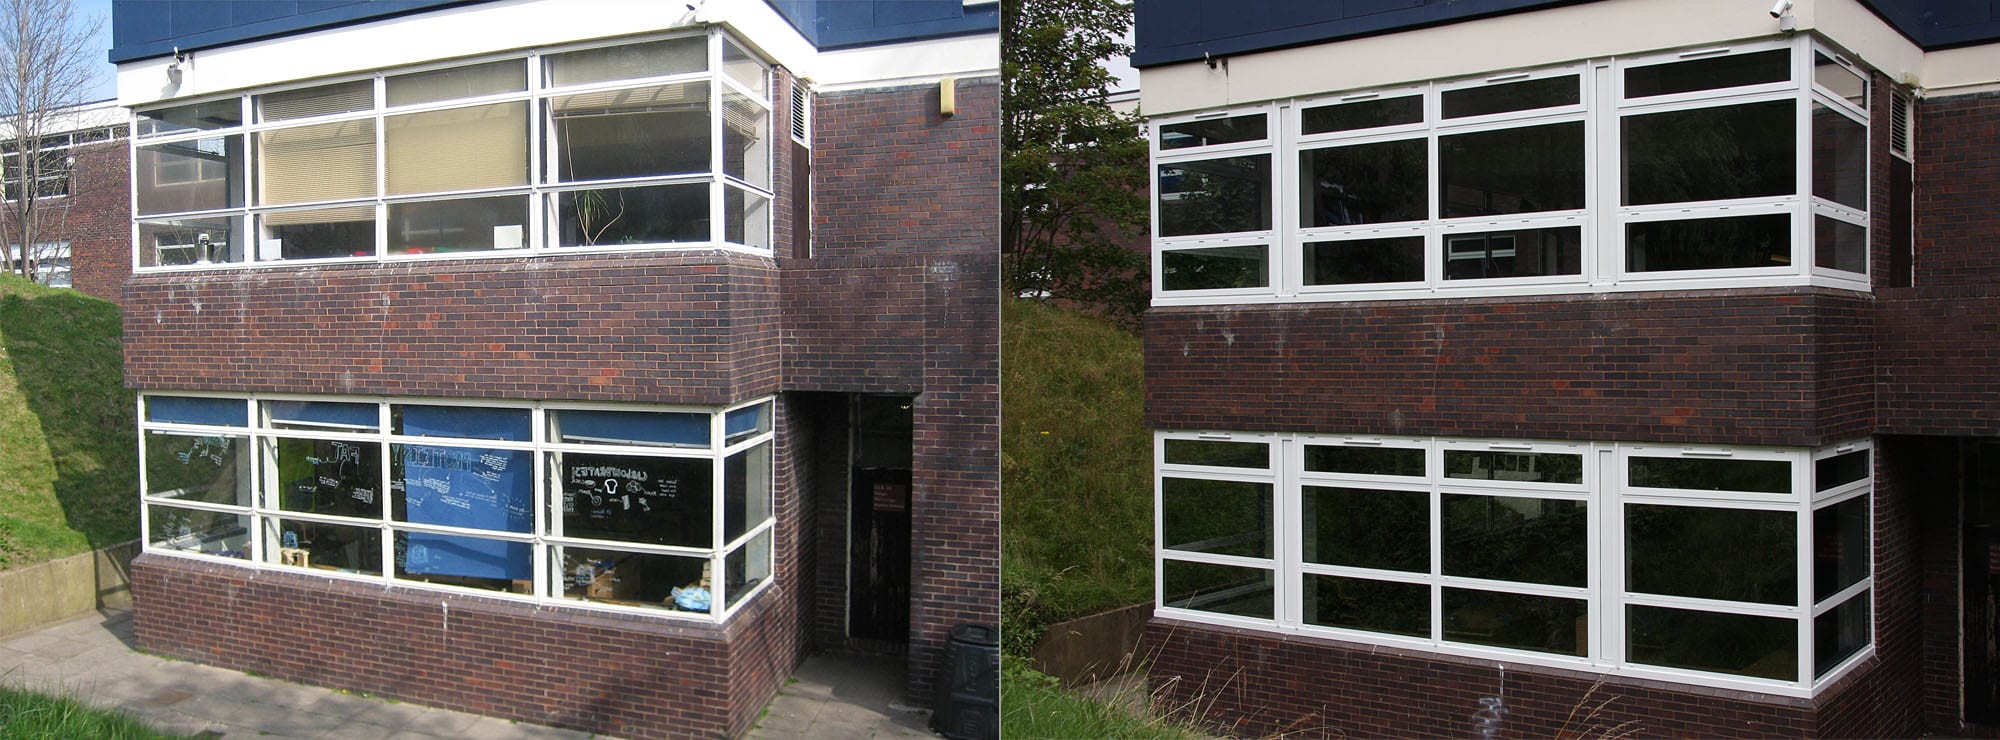 <strong>Comprehensive School in West Midlands</strong>Replacement steel windows with white commercial aluminium to all elevations.